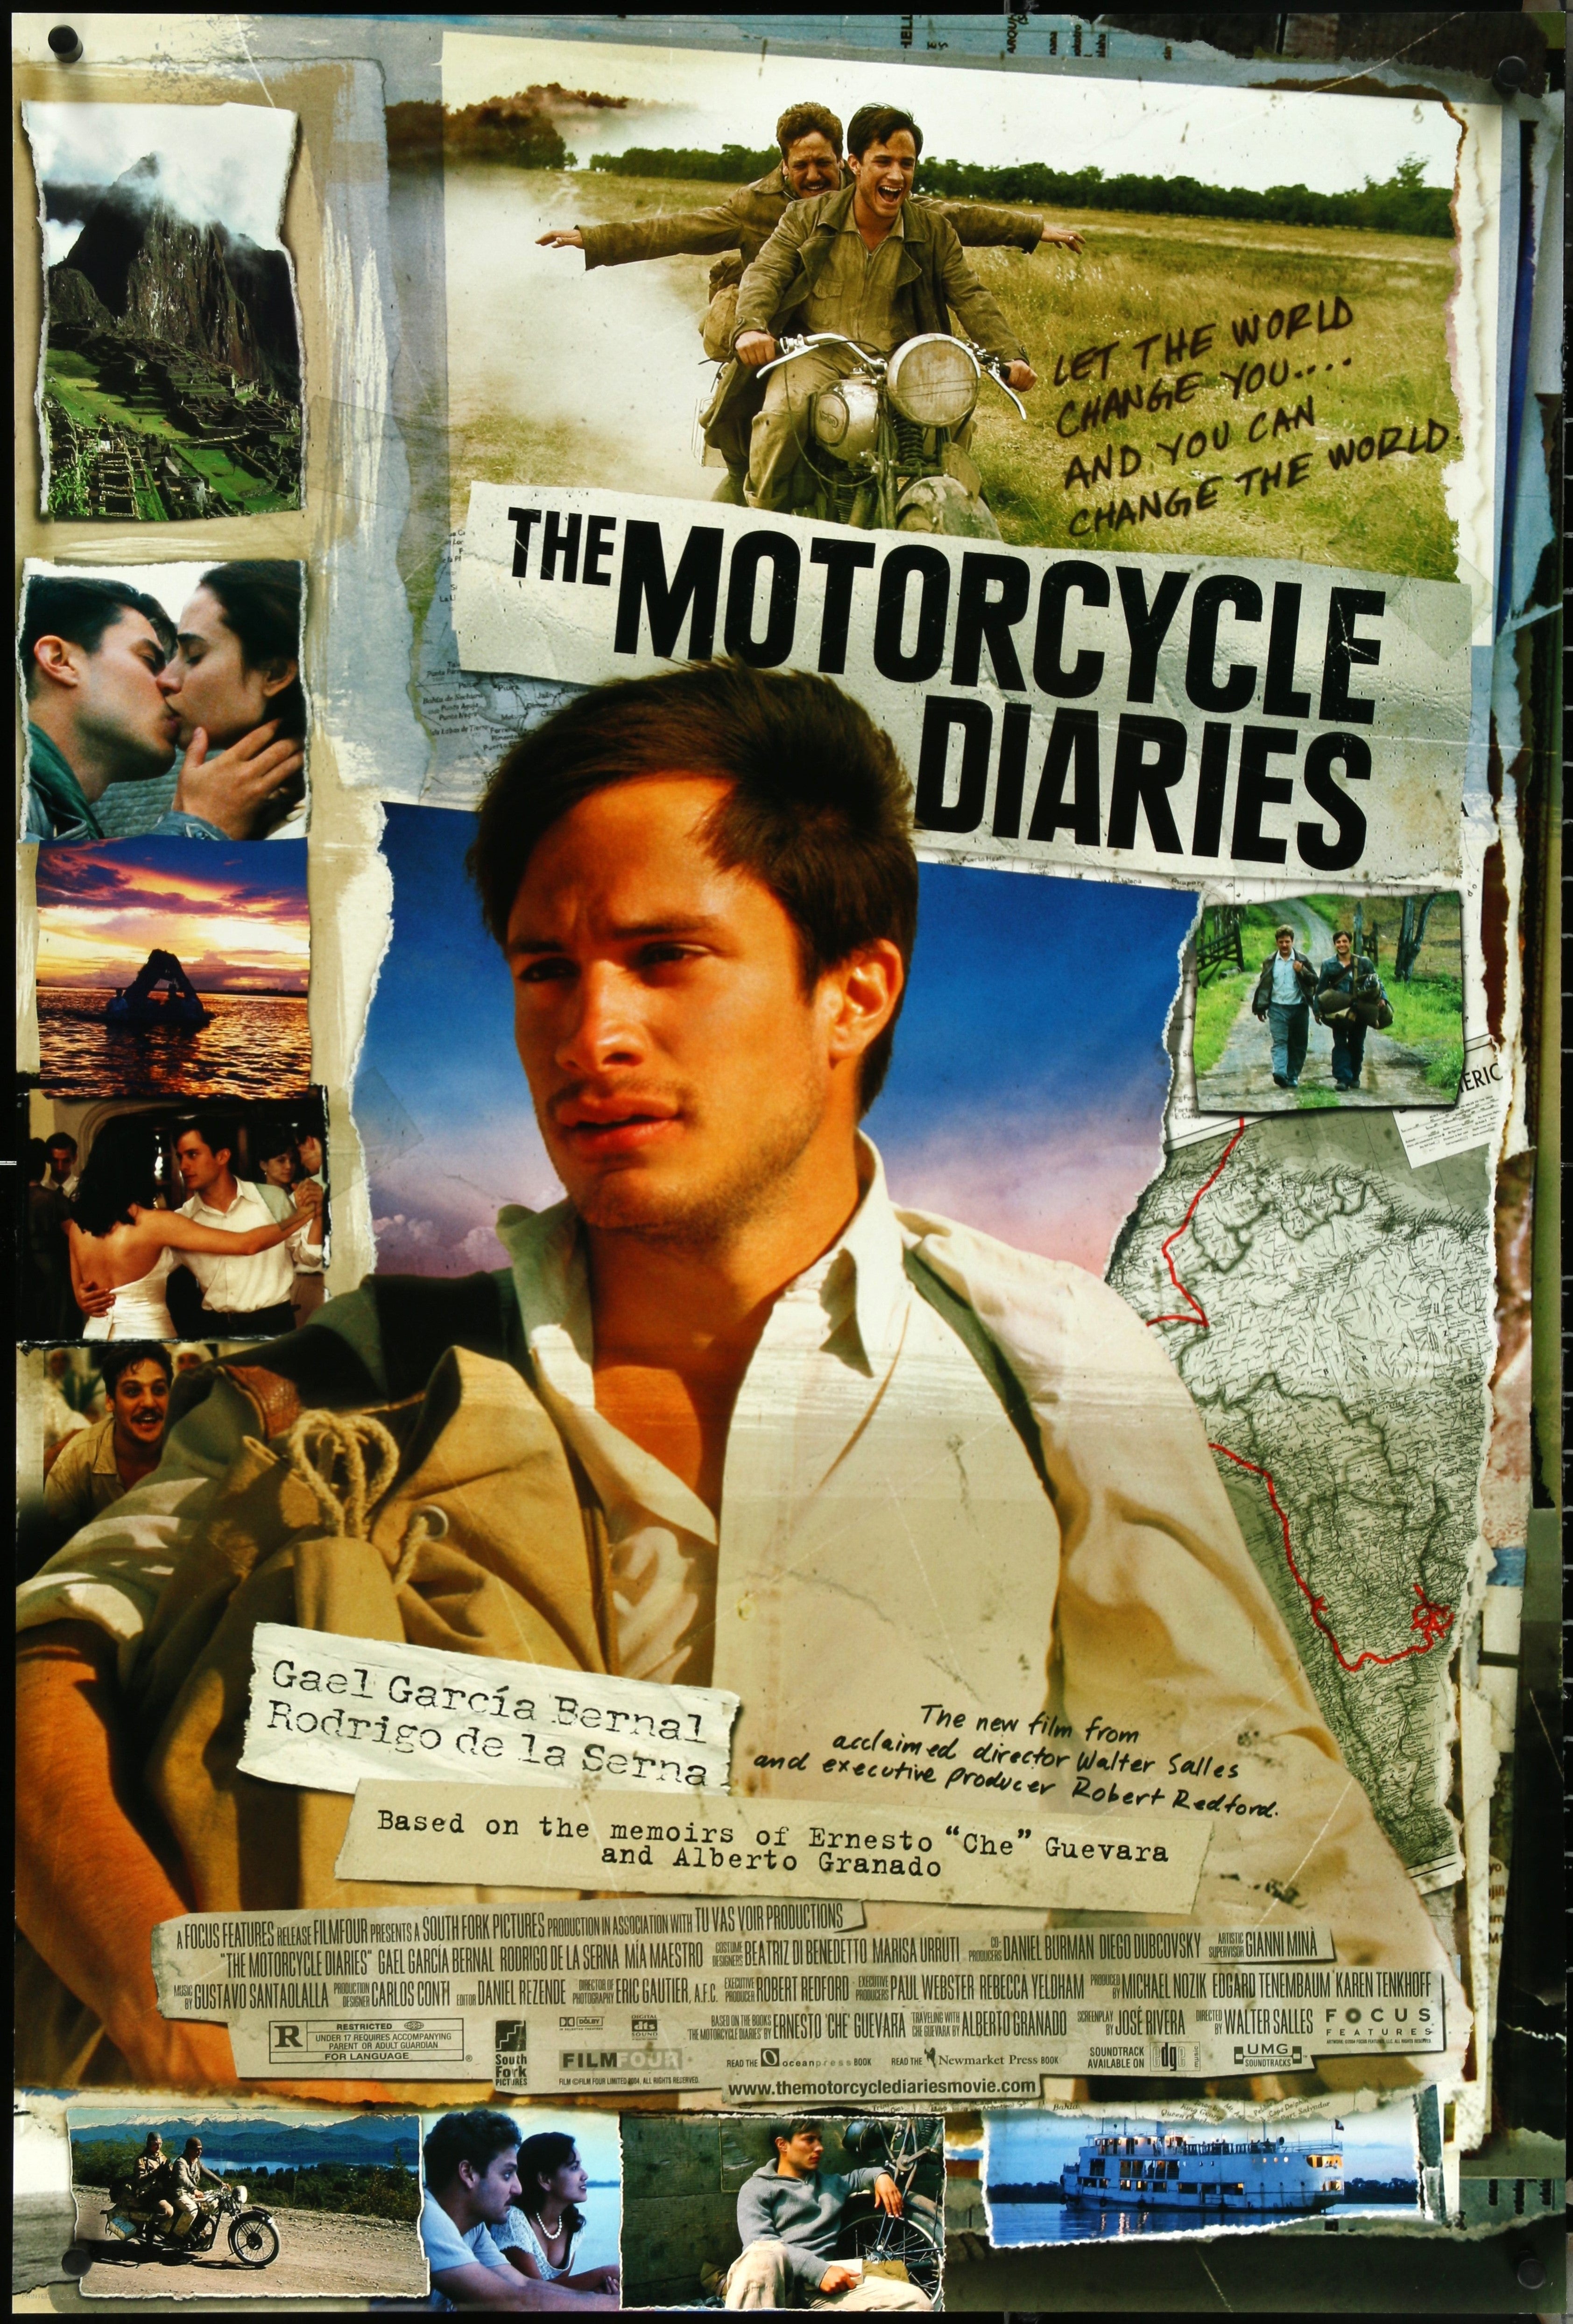 THE MOTORCYCLE DIARIES (2004)